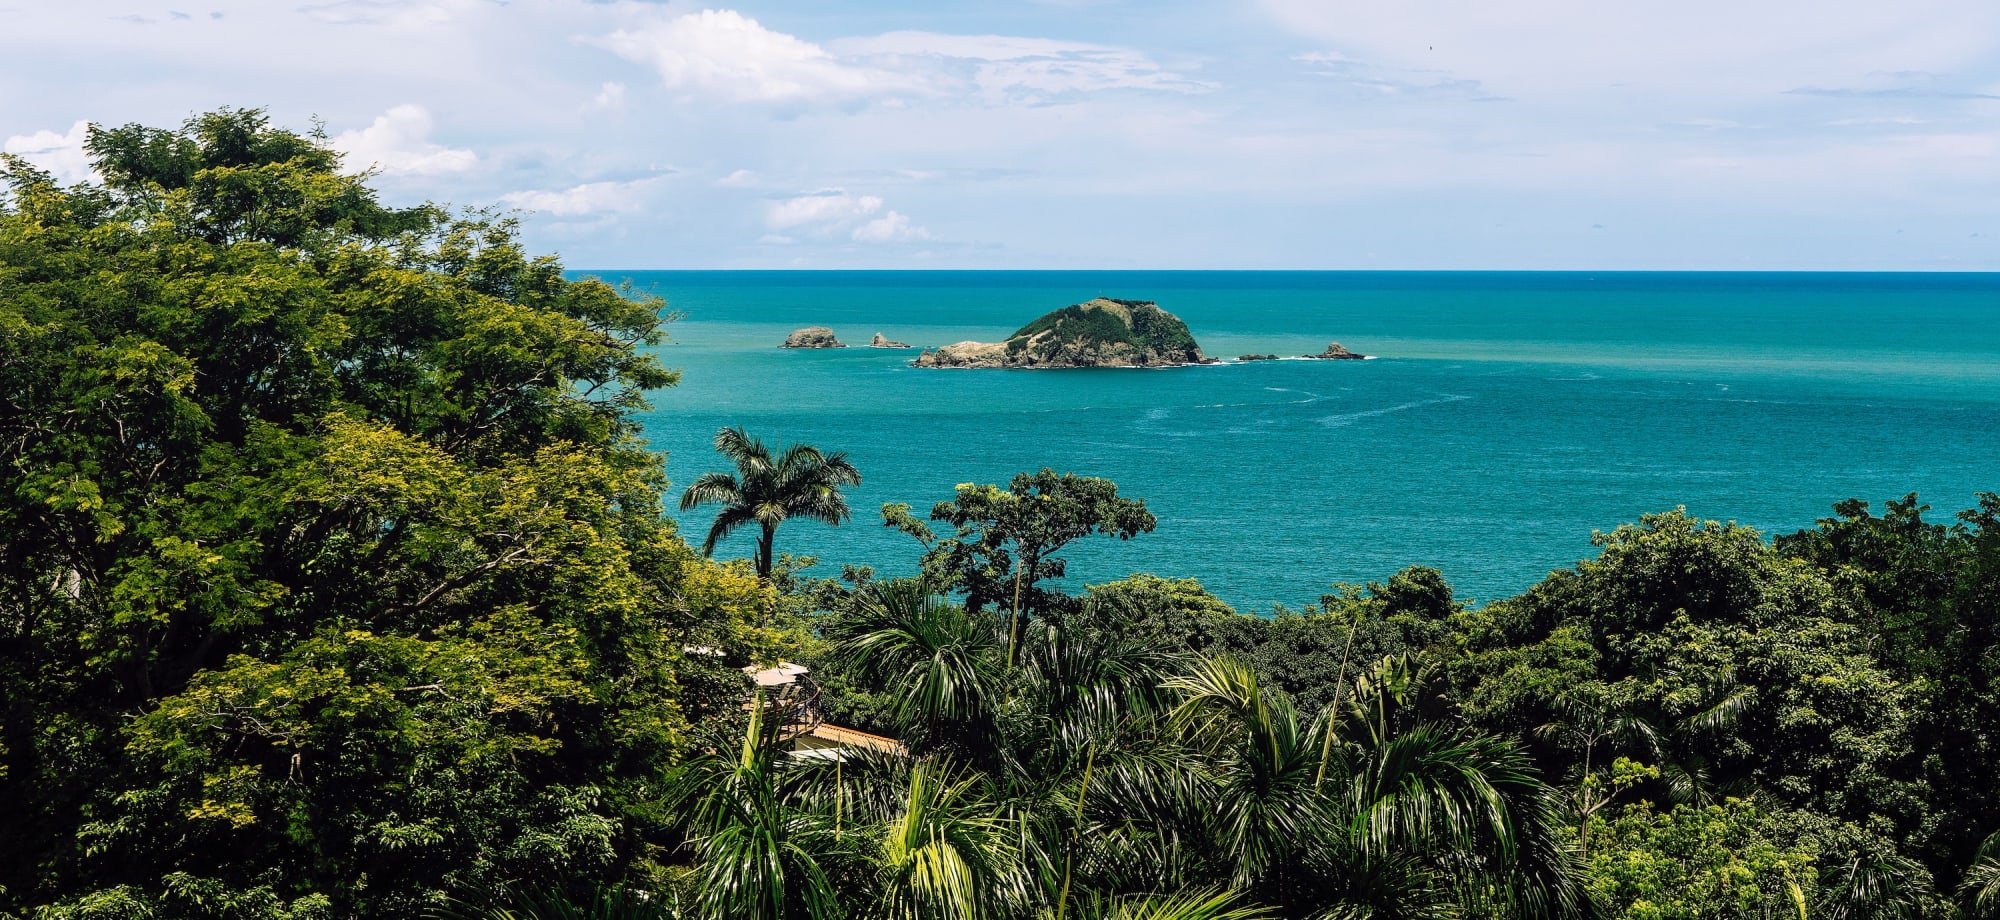 Responsible Travel Guide: Costa Rica